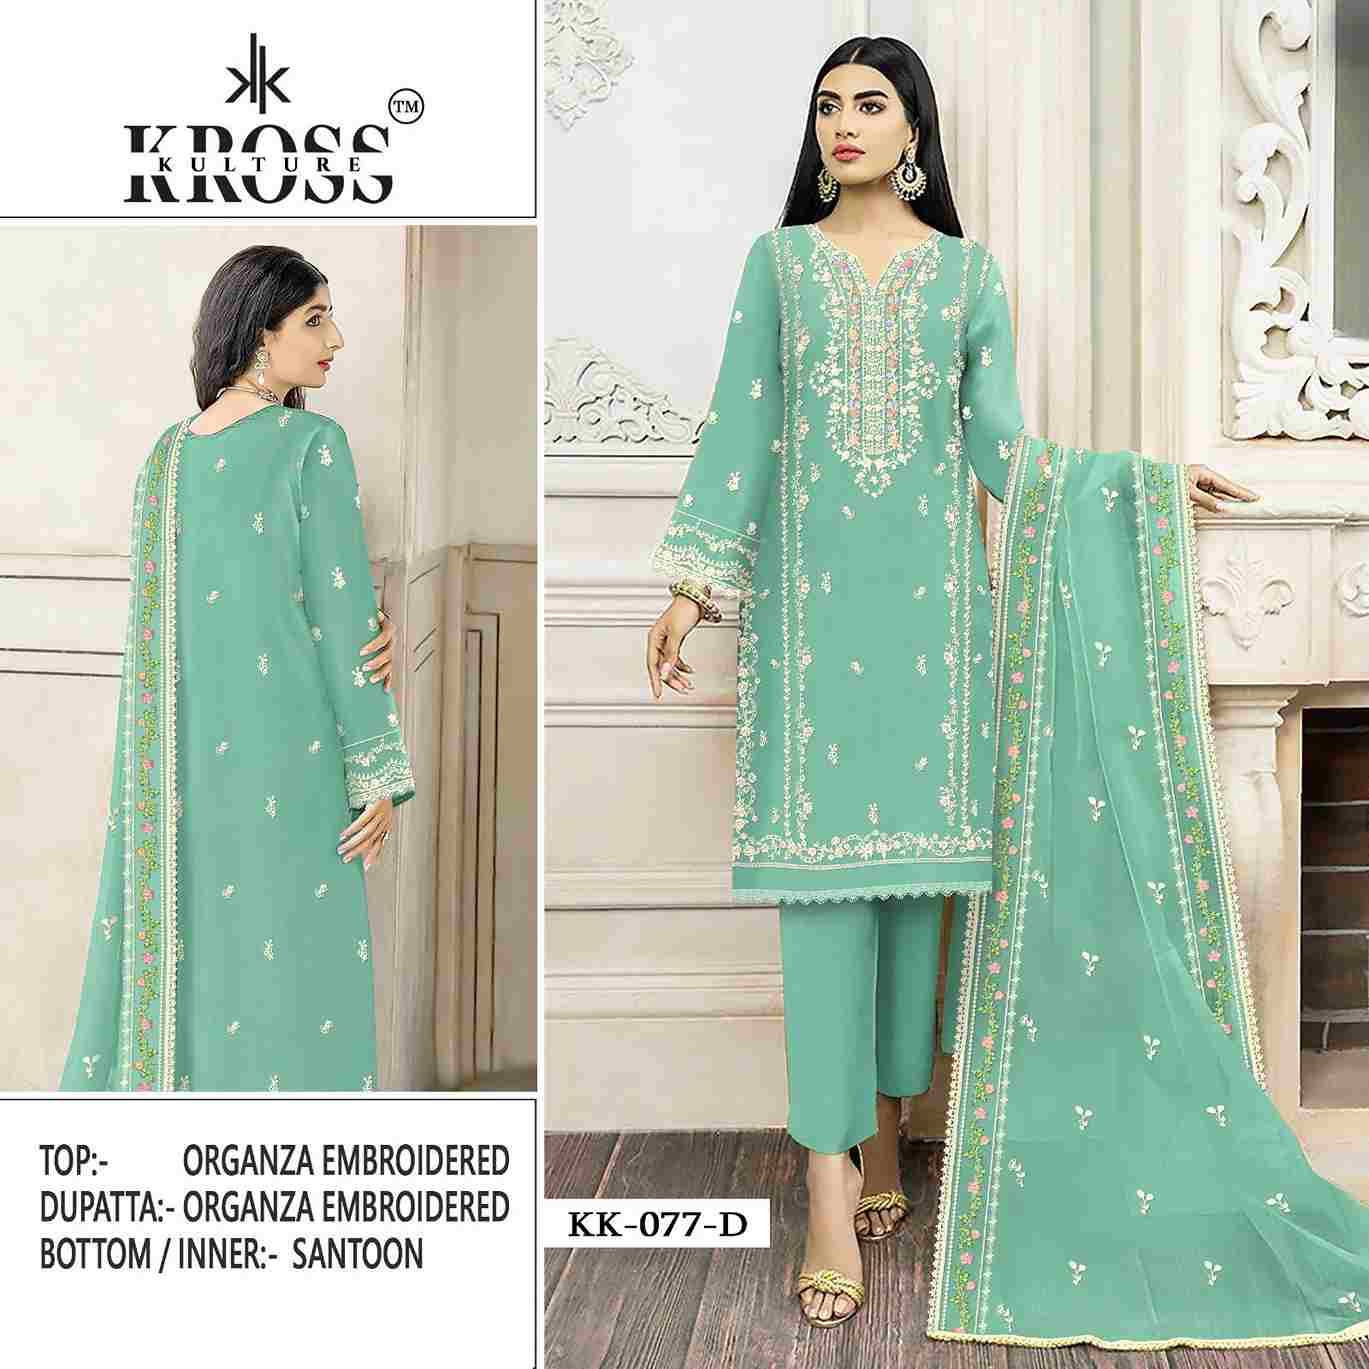 Kross Kulture Hit Design 077 Colours By Kross Kulture 077-A To 077-D Series Beautiful Stylish Pakistani Suits Fancy Colorful Casual Wear & Ethnic Wear & Ready To Wear Organza Embroidered Dresses At Wholesale Price